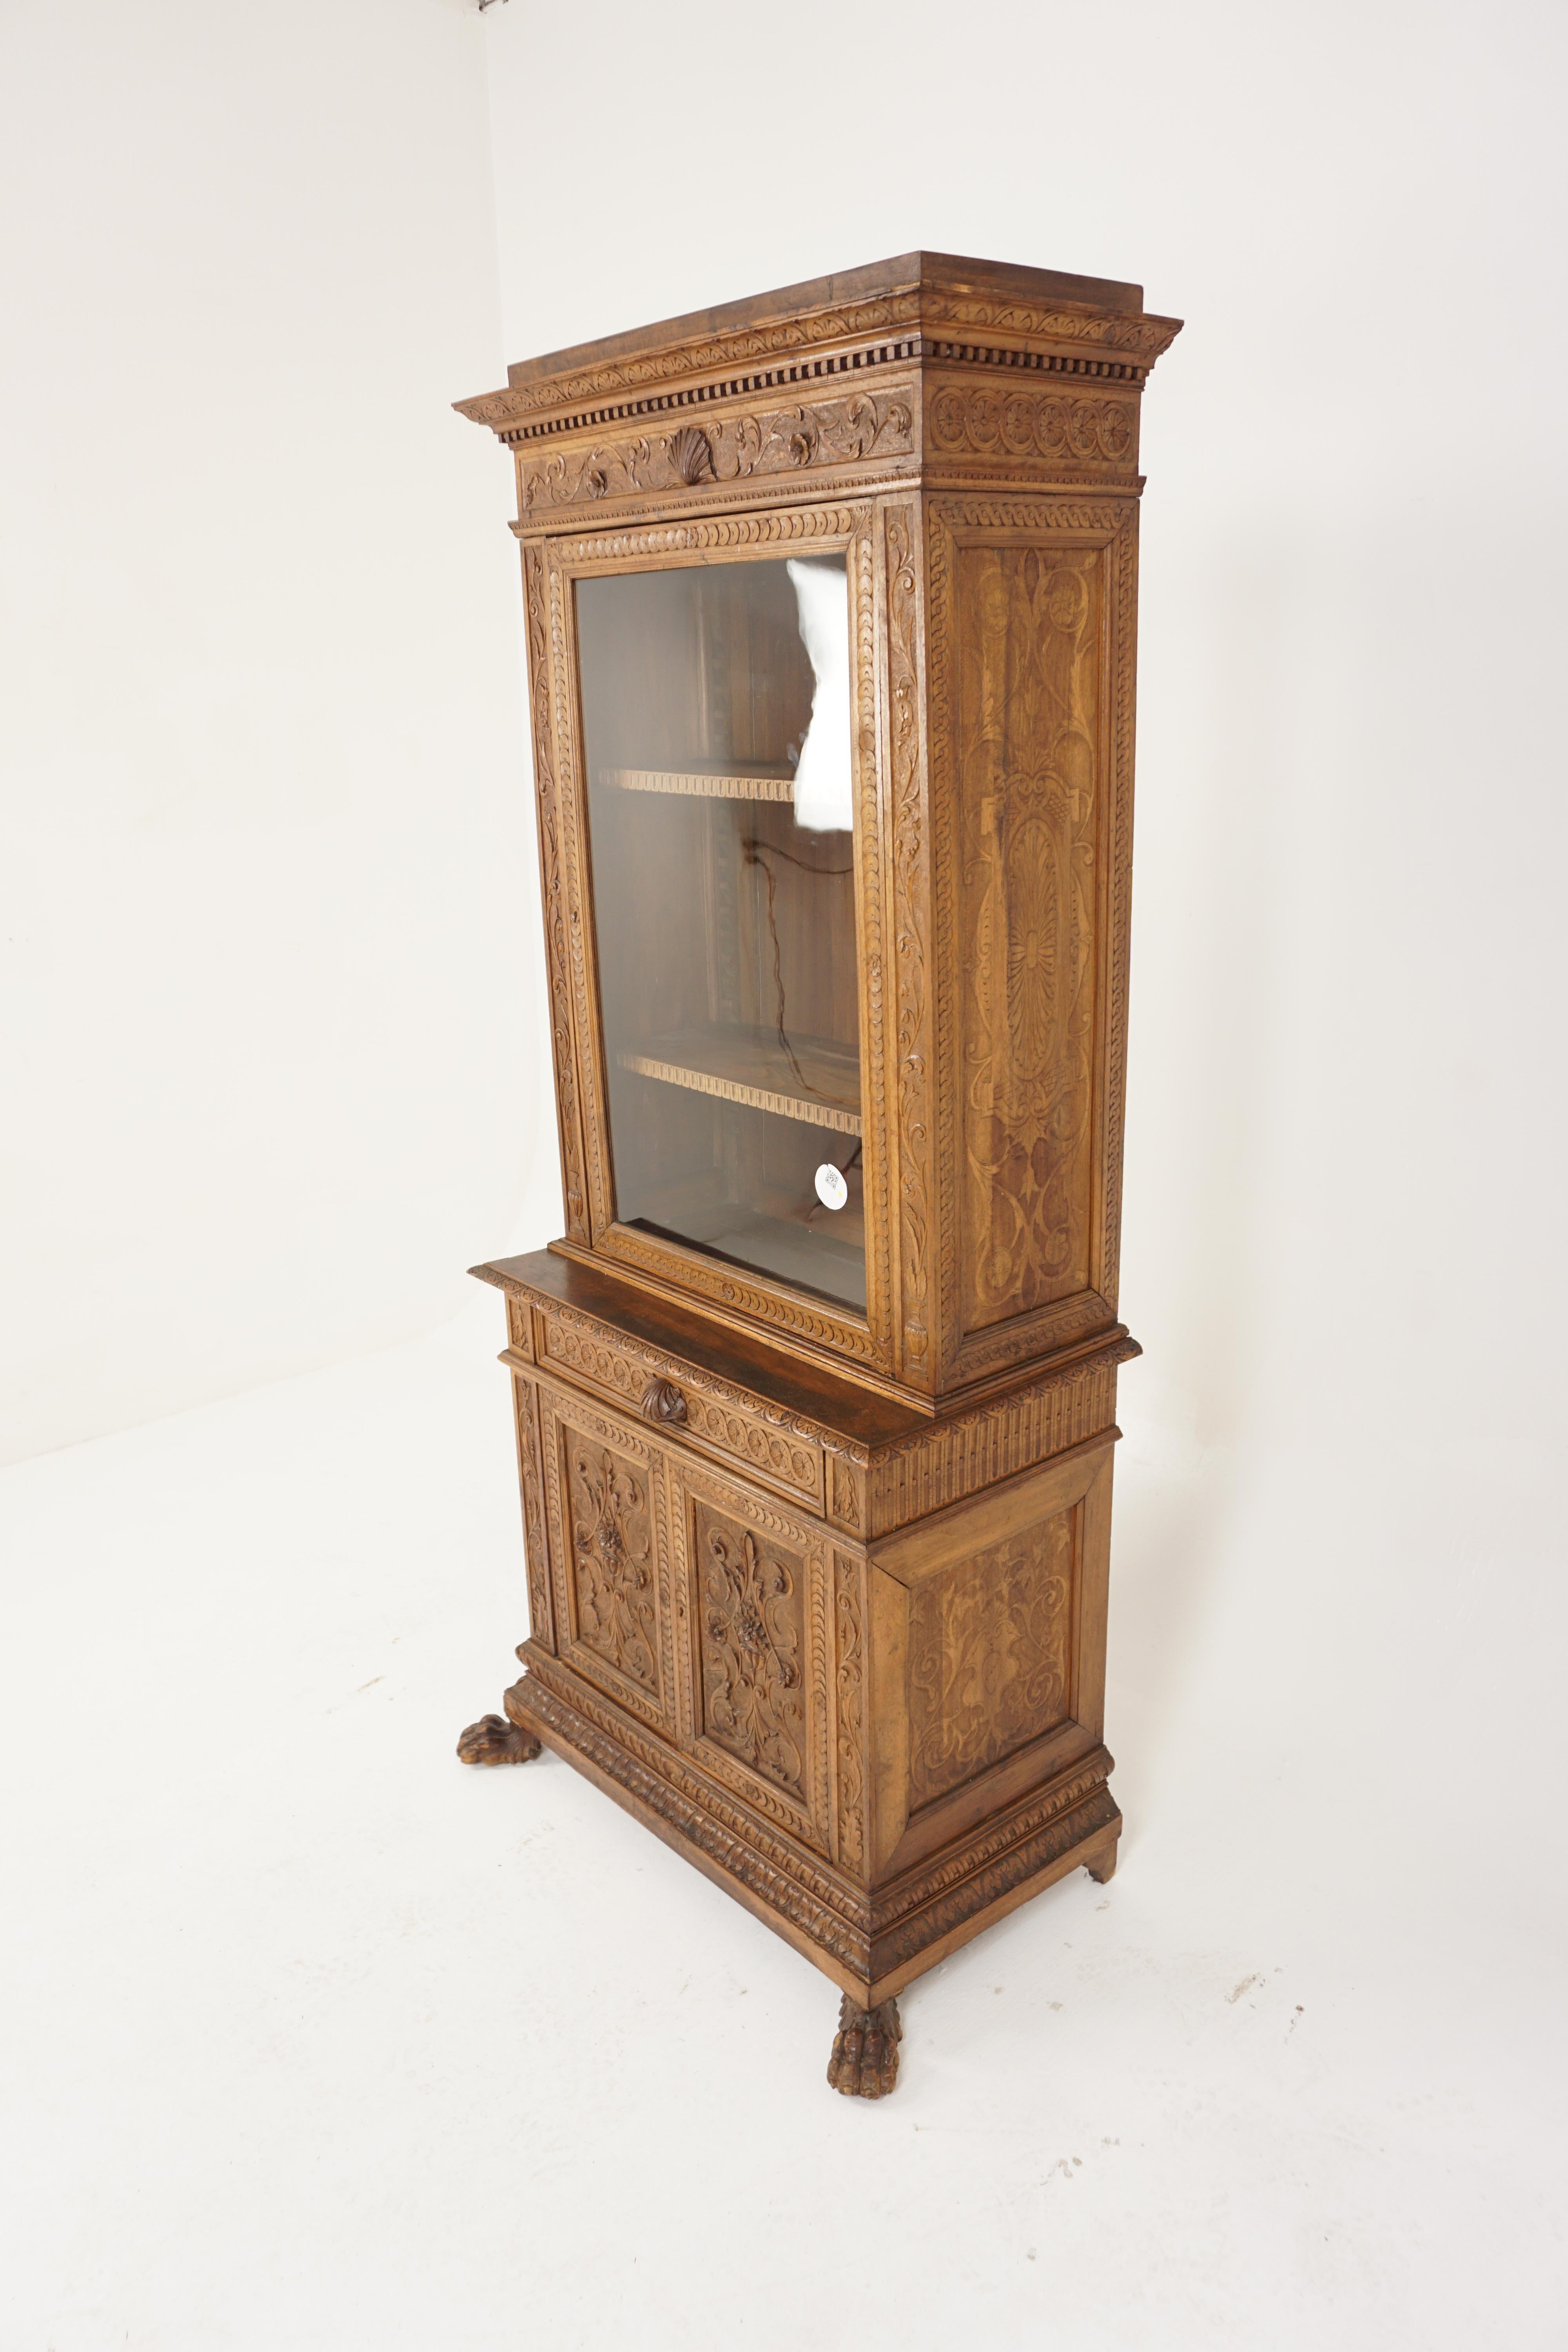 Vintage carved walnut display cabinet, China cabinet, India 1940, H684


Possibly India 1940
Solid walnut
Original Finish

Carved cornice on top with a dentil frieze below
Carved original glass door opens to reveal two adjustable wooden